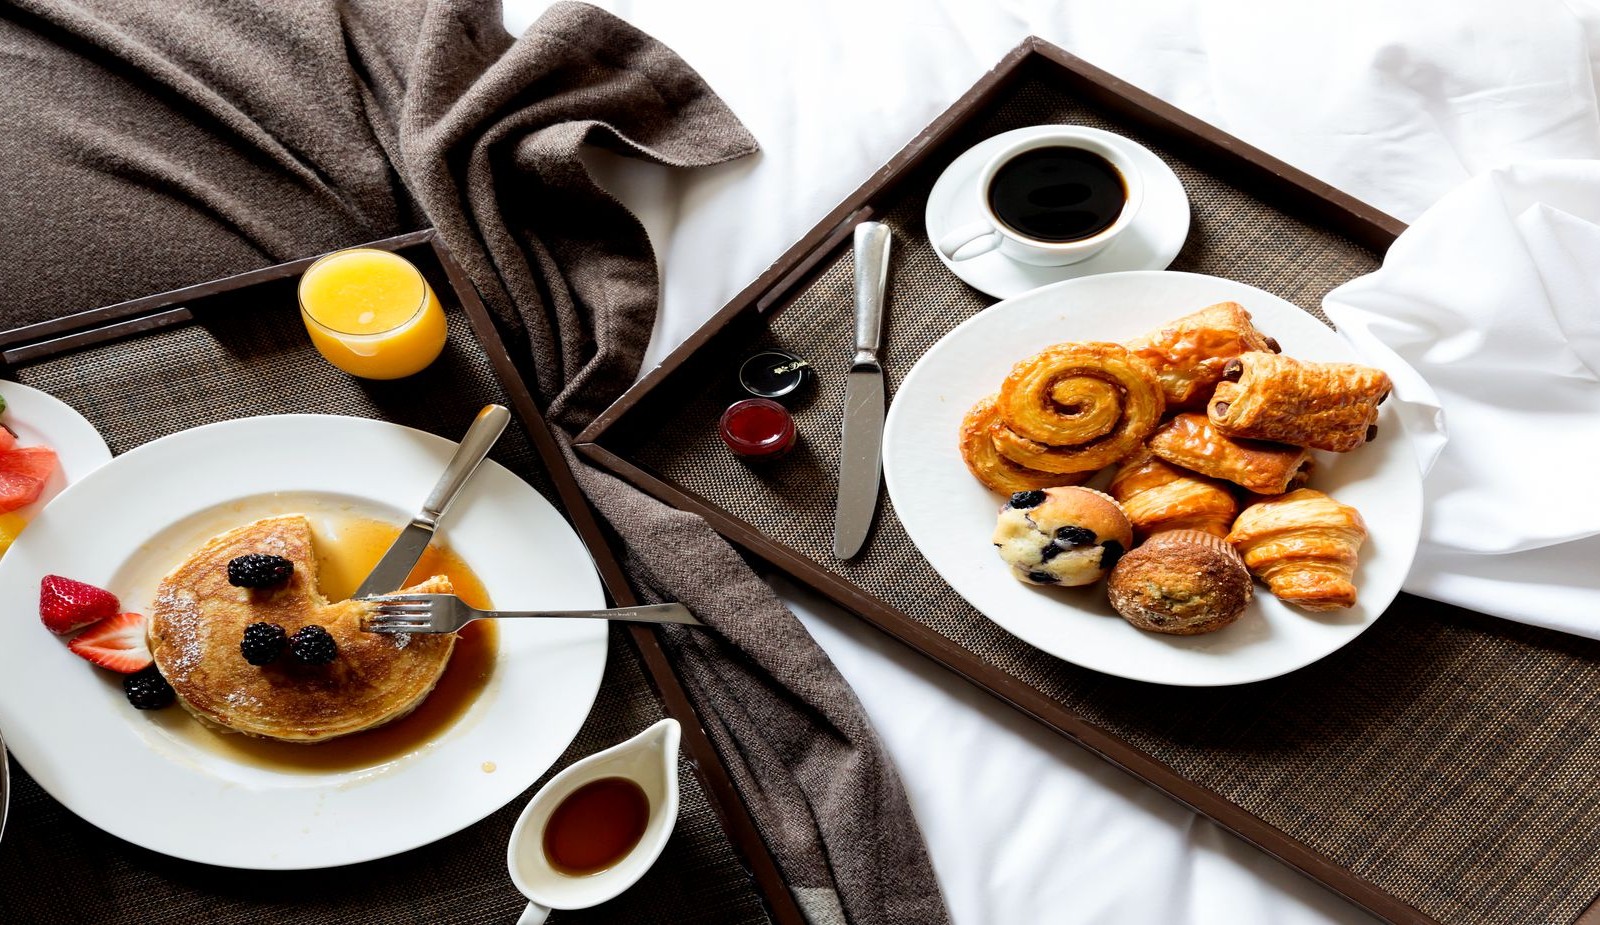 Breakfast in bed with fresh muffins, croissants, and pastries. Maybe you would like our famous pancakes? Both are available in Mooo restaurant or through room service.